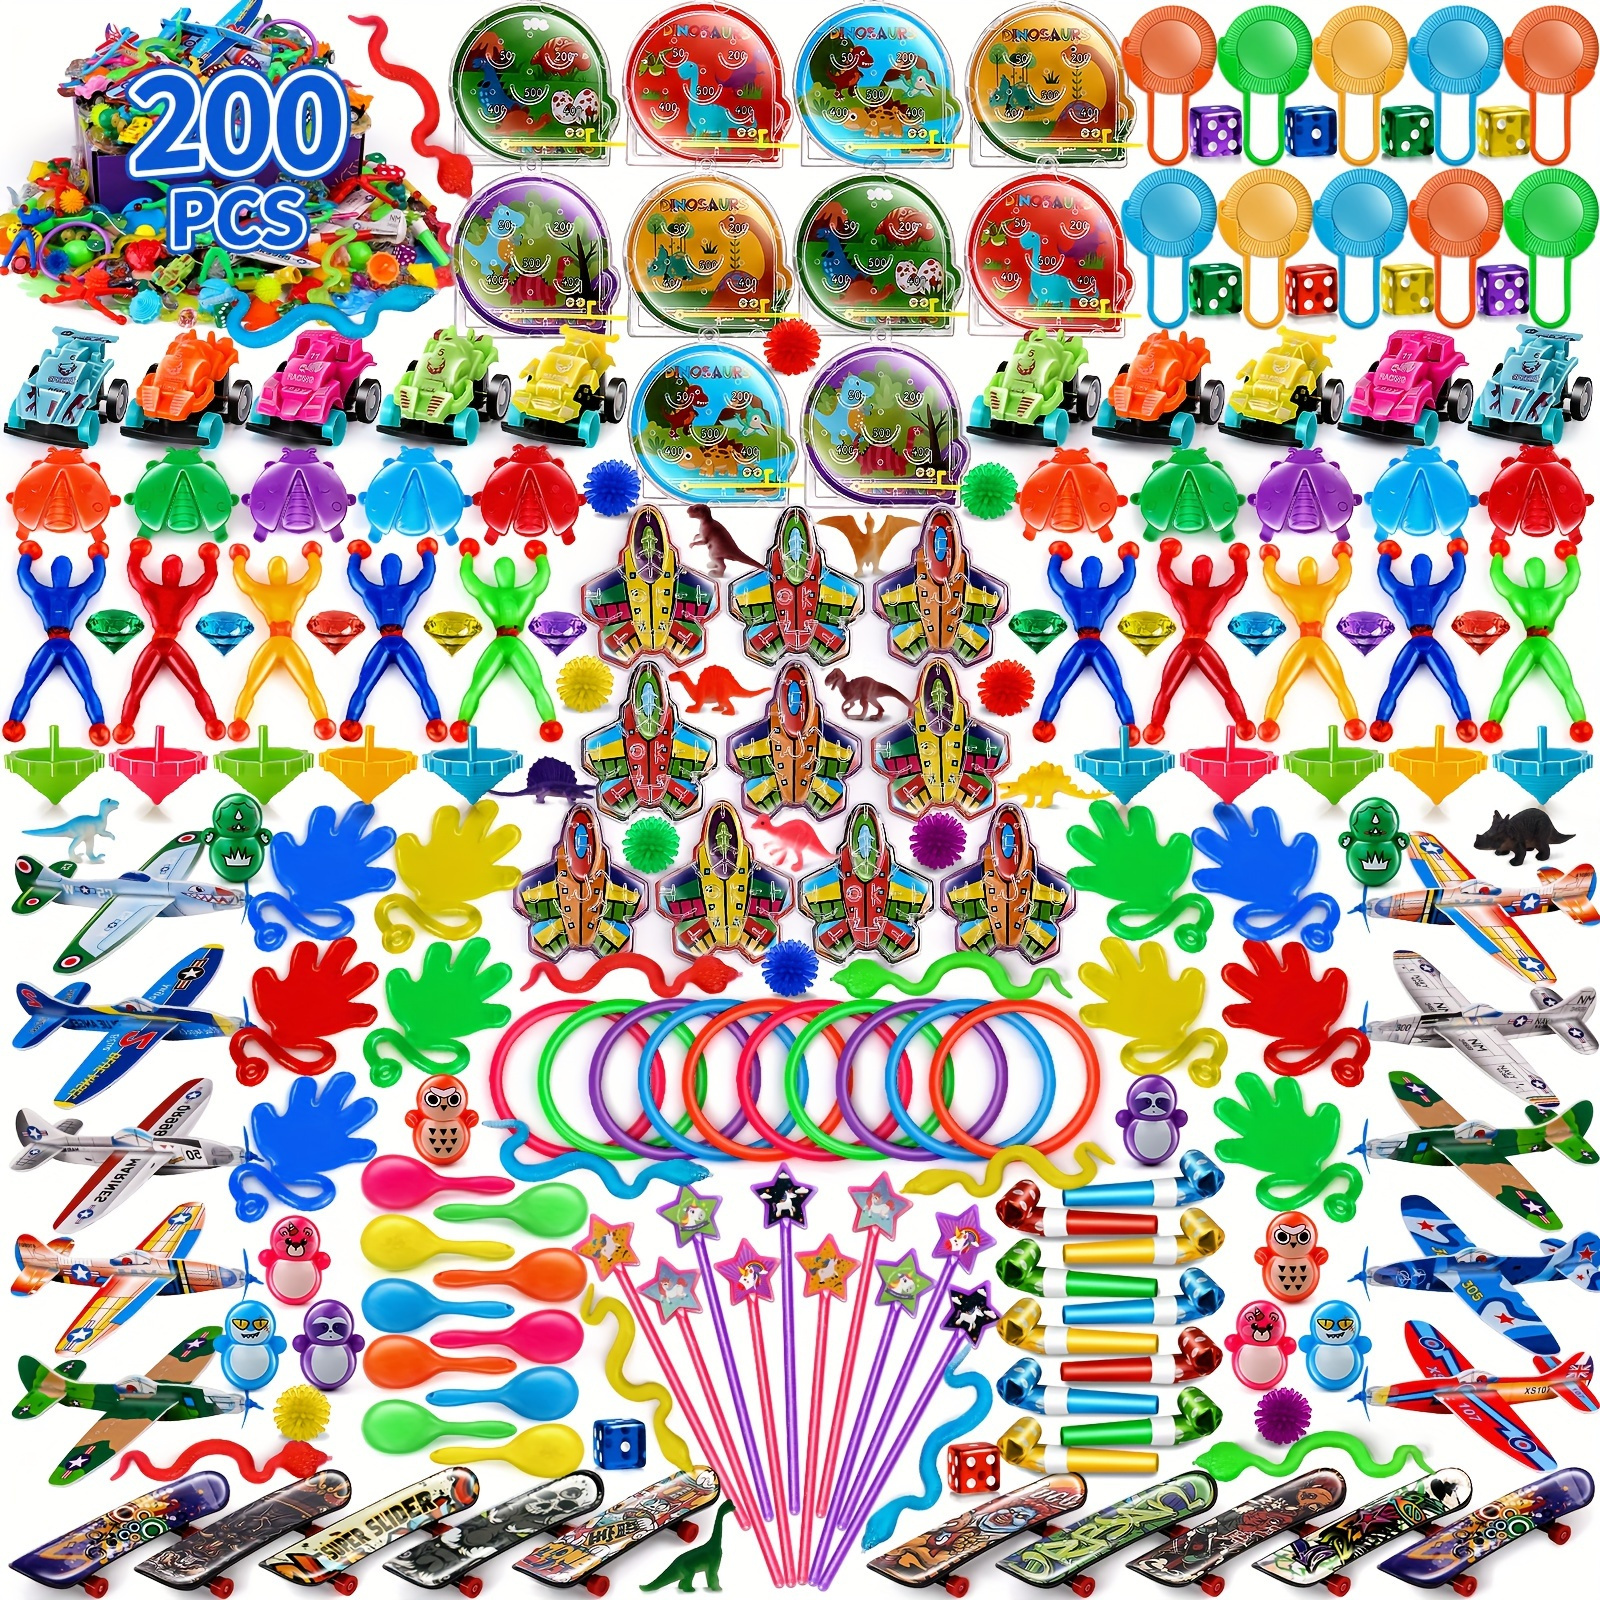 

200pcs-f, Classroom Prizes, Party Favors, Goodie Bag Fillers, Toy Assortment, Birthday Gift Toys, Carnival Prizes, Party Gifts, Holiday Gifts